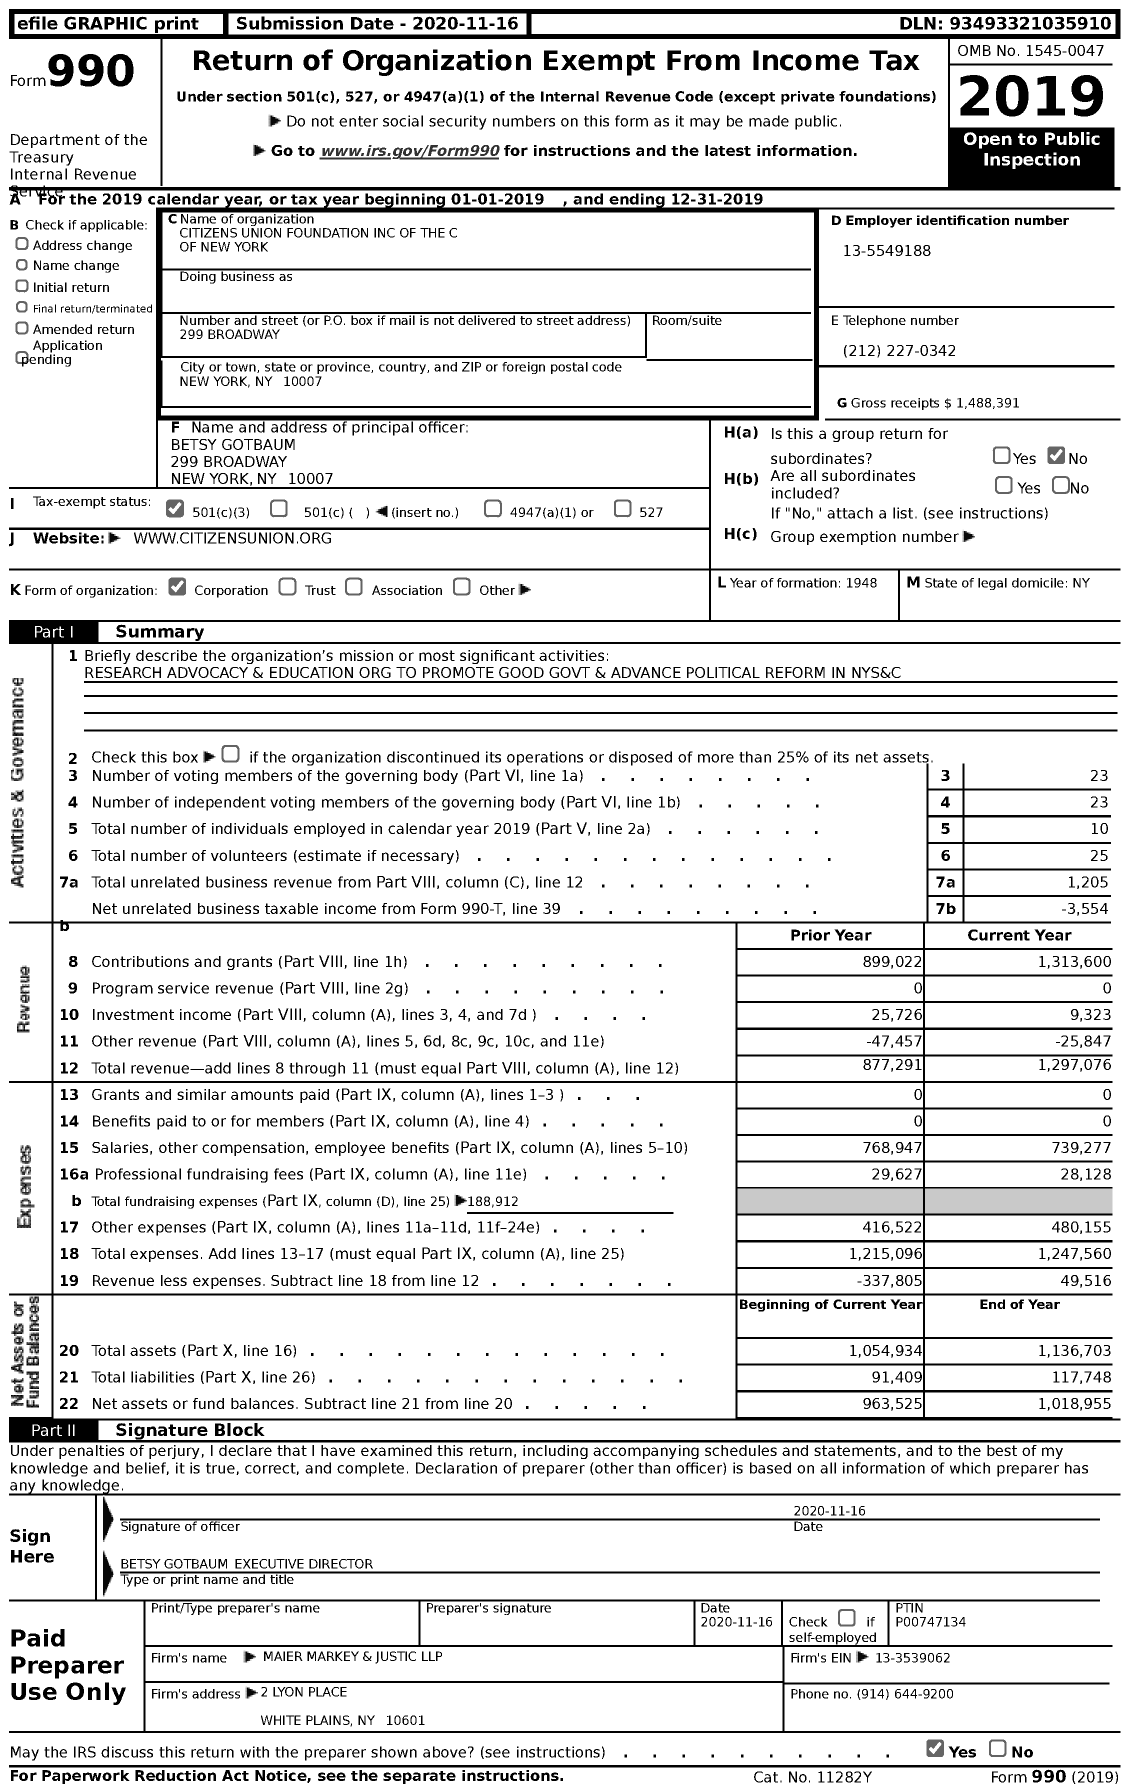 Image of first page of 2019 Form 990 for Citizens Union Foundation of the City of New York